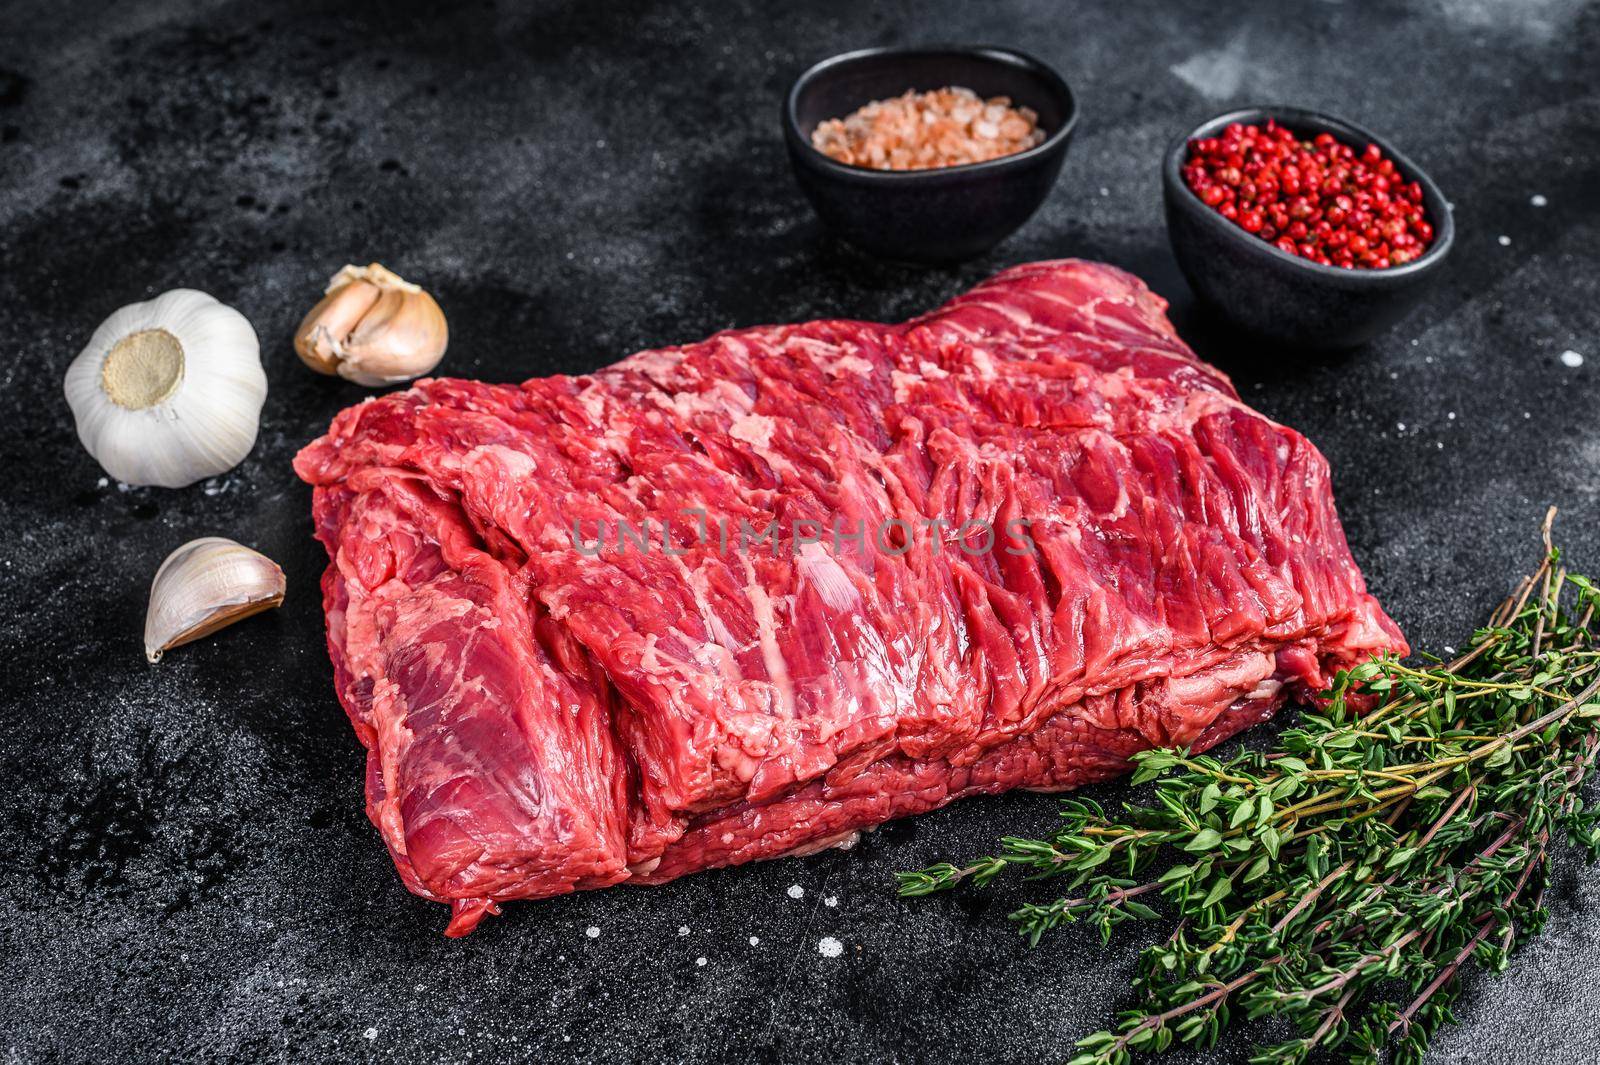 Raw fresh marble beef brisket meat with herbs. Black background. Top view.